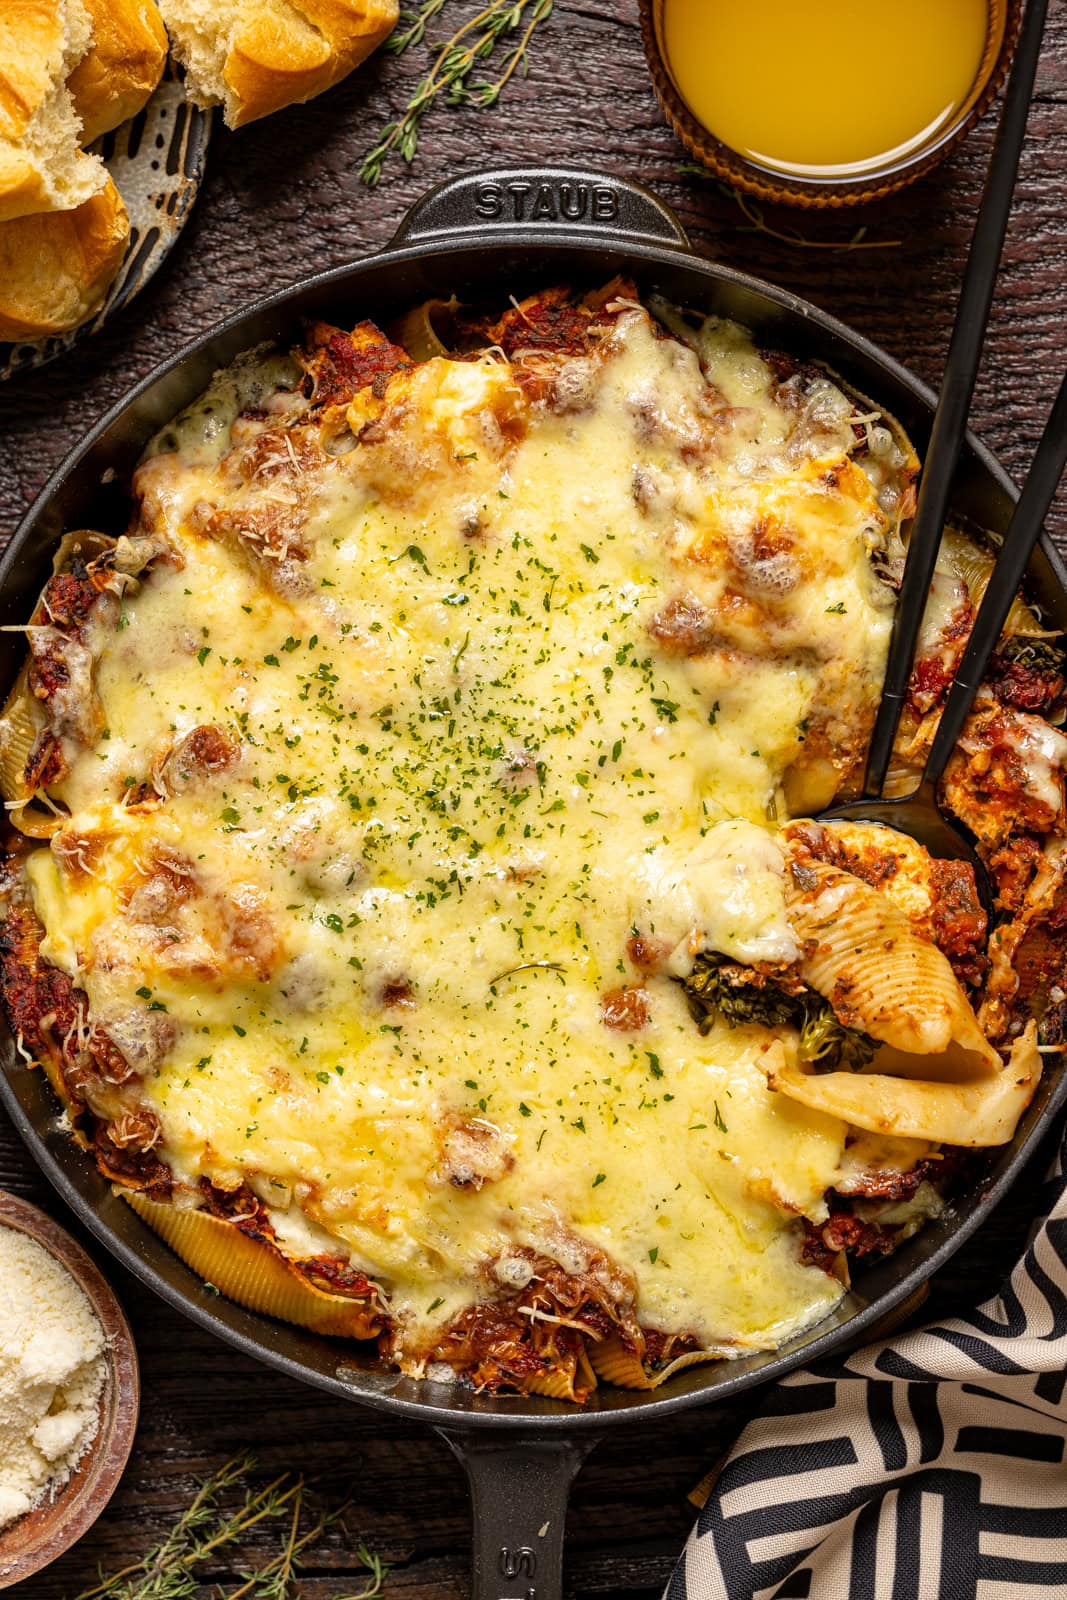 Stuffed shells in a skillet with a side of parmesan and a drink.